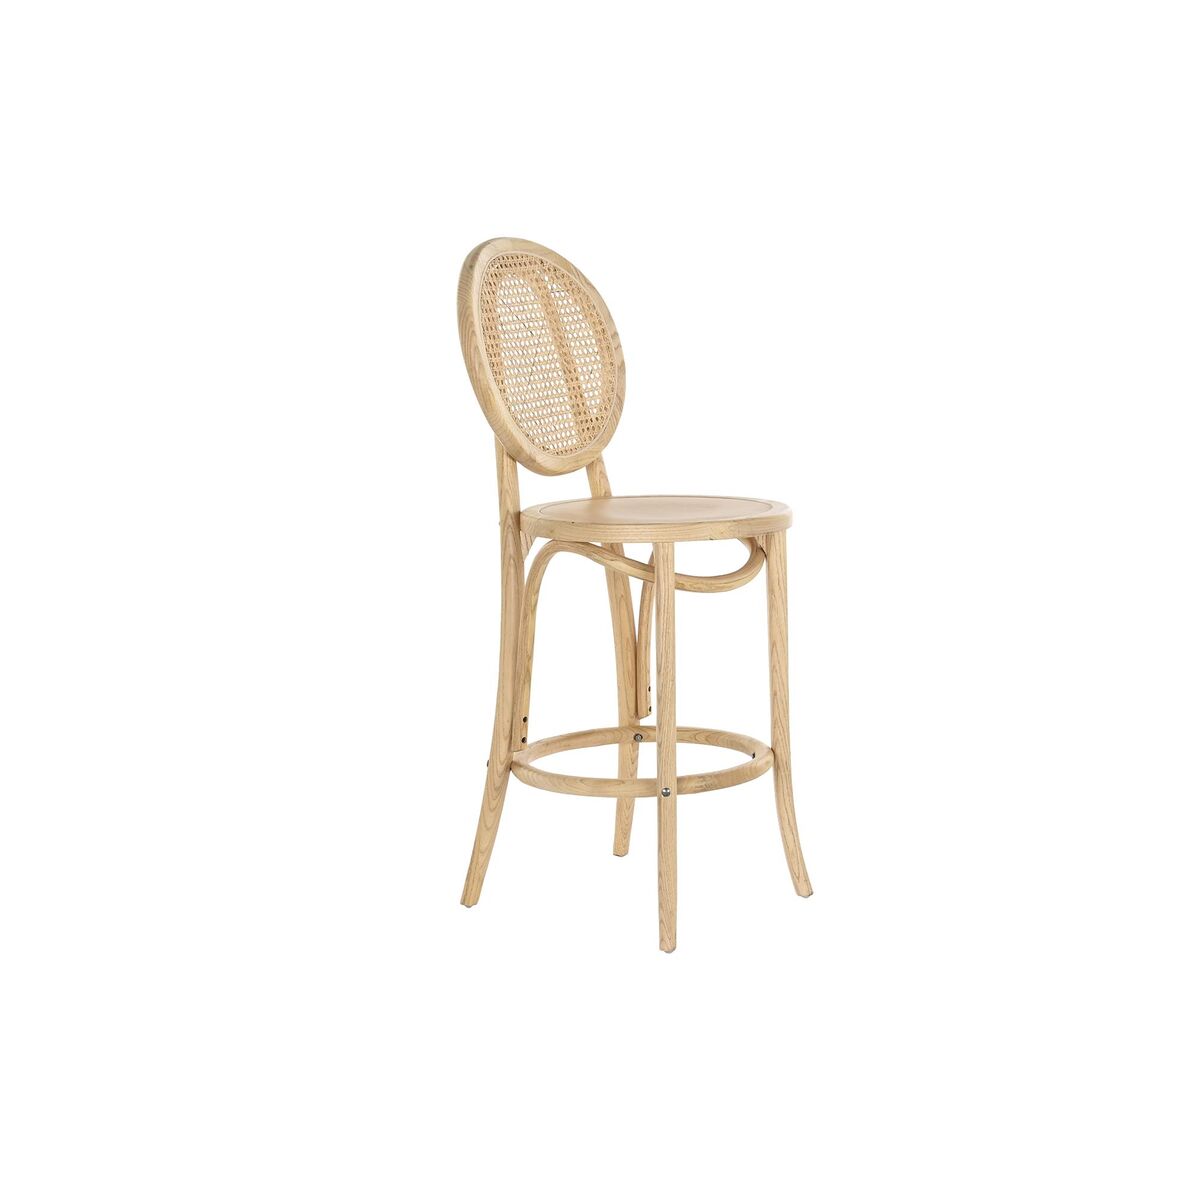 Stool in Wood and Rattan (43 x 43 x 108 cm)